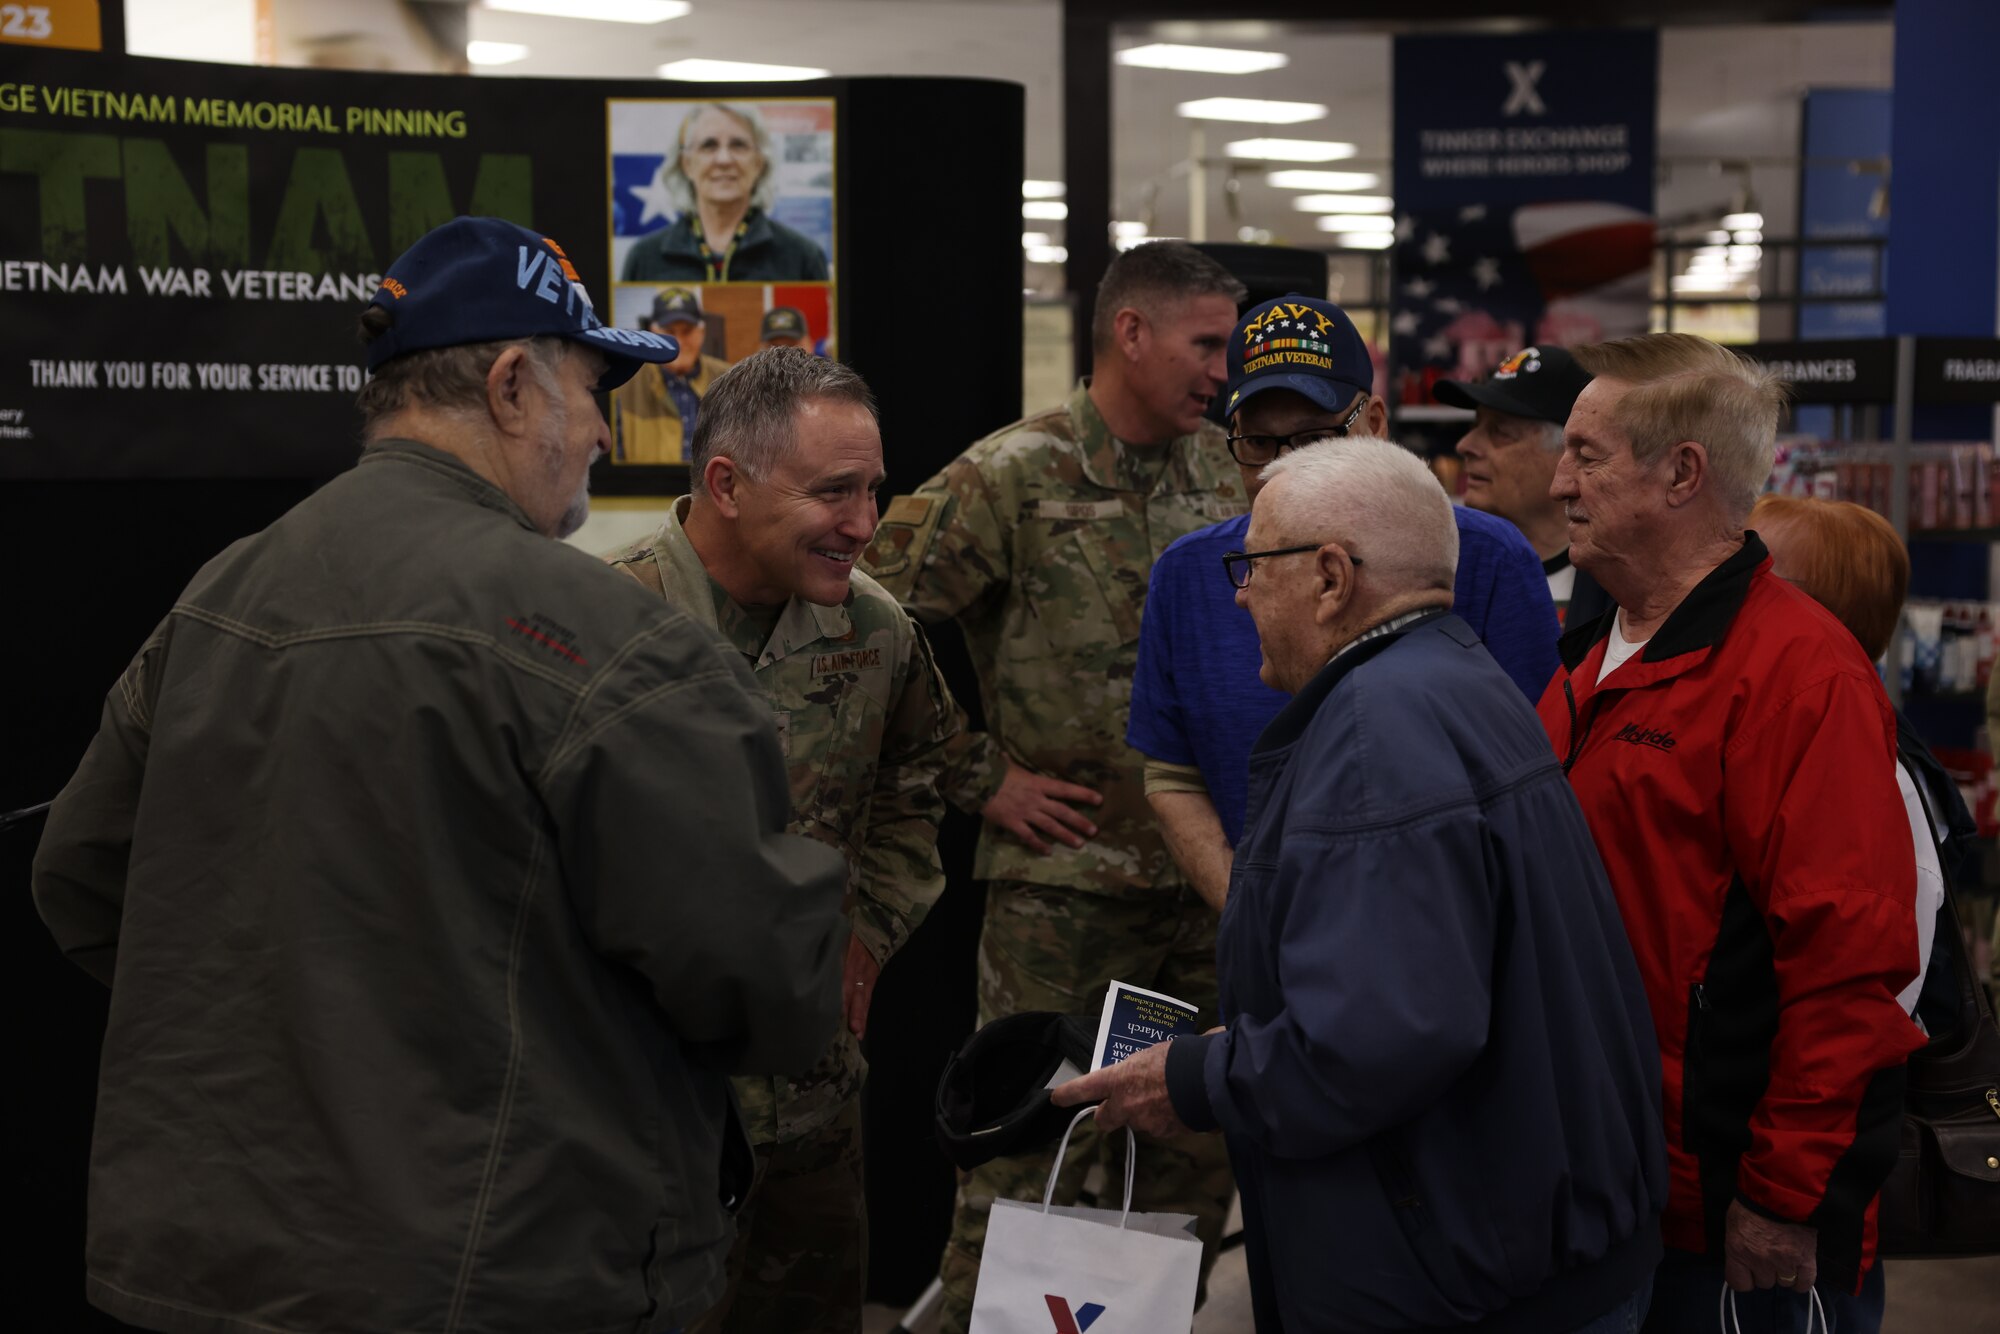 Col. Giles and Chief Master Sgt. Sipos greet Vietnam Veterans